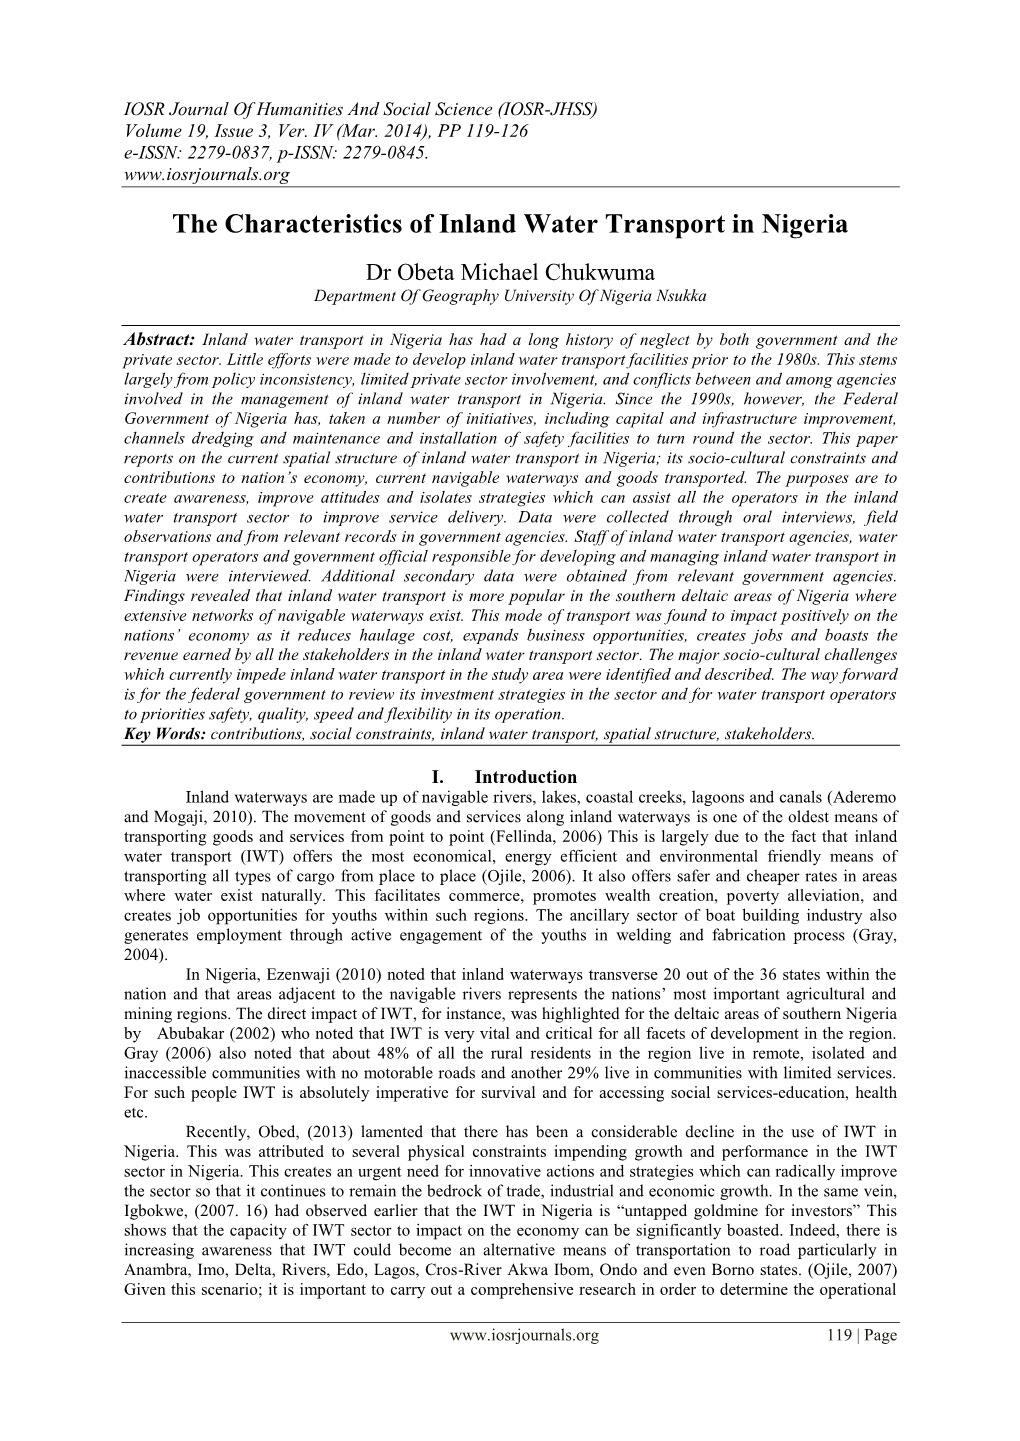 The Characteristics of Inland Water Transport in Nigeria